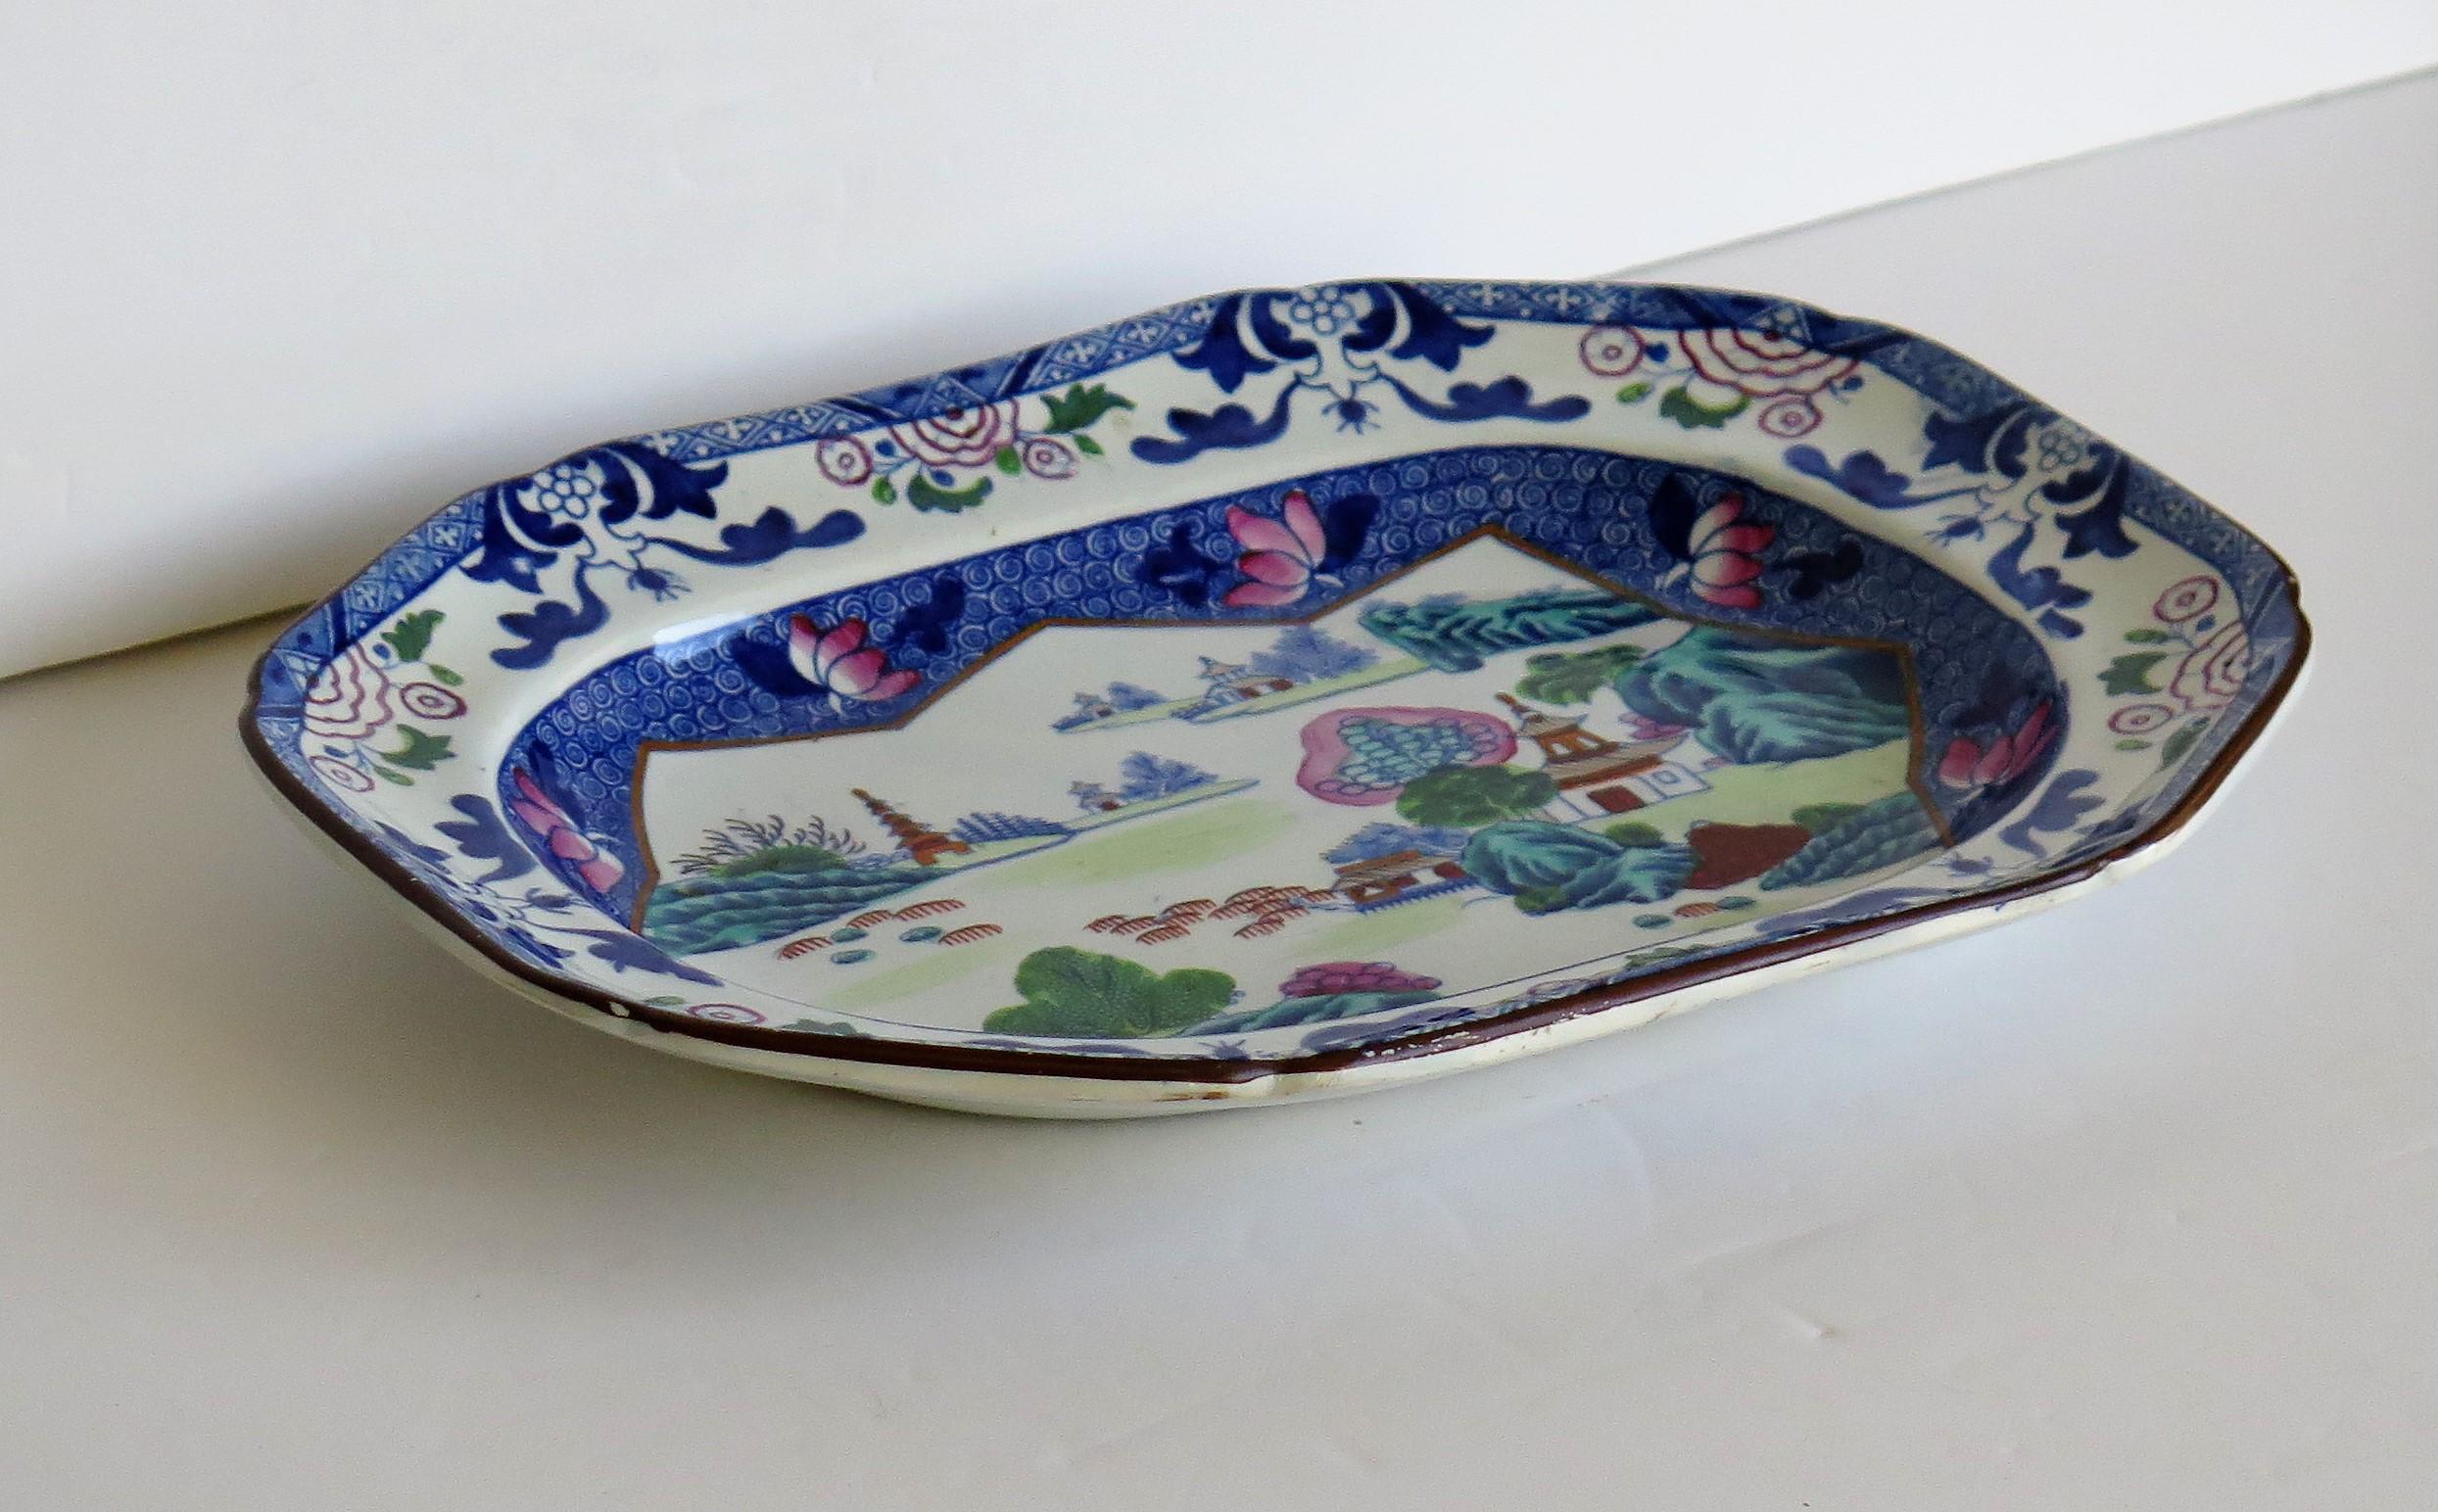 This is a good rounded rectangular Ironstone (stone china) serving platter or plate, in the Chinese Landscape pattern, circa 1818, which we attribute to the factory of Hicks and Meigh of Shelton, Hanley, Staffordshire Potteries, England, who made